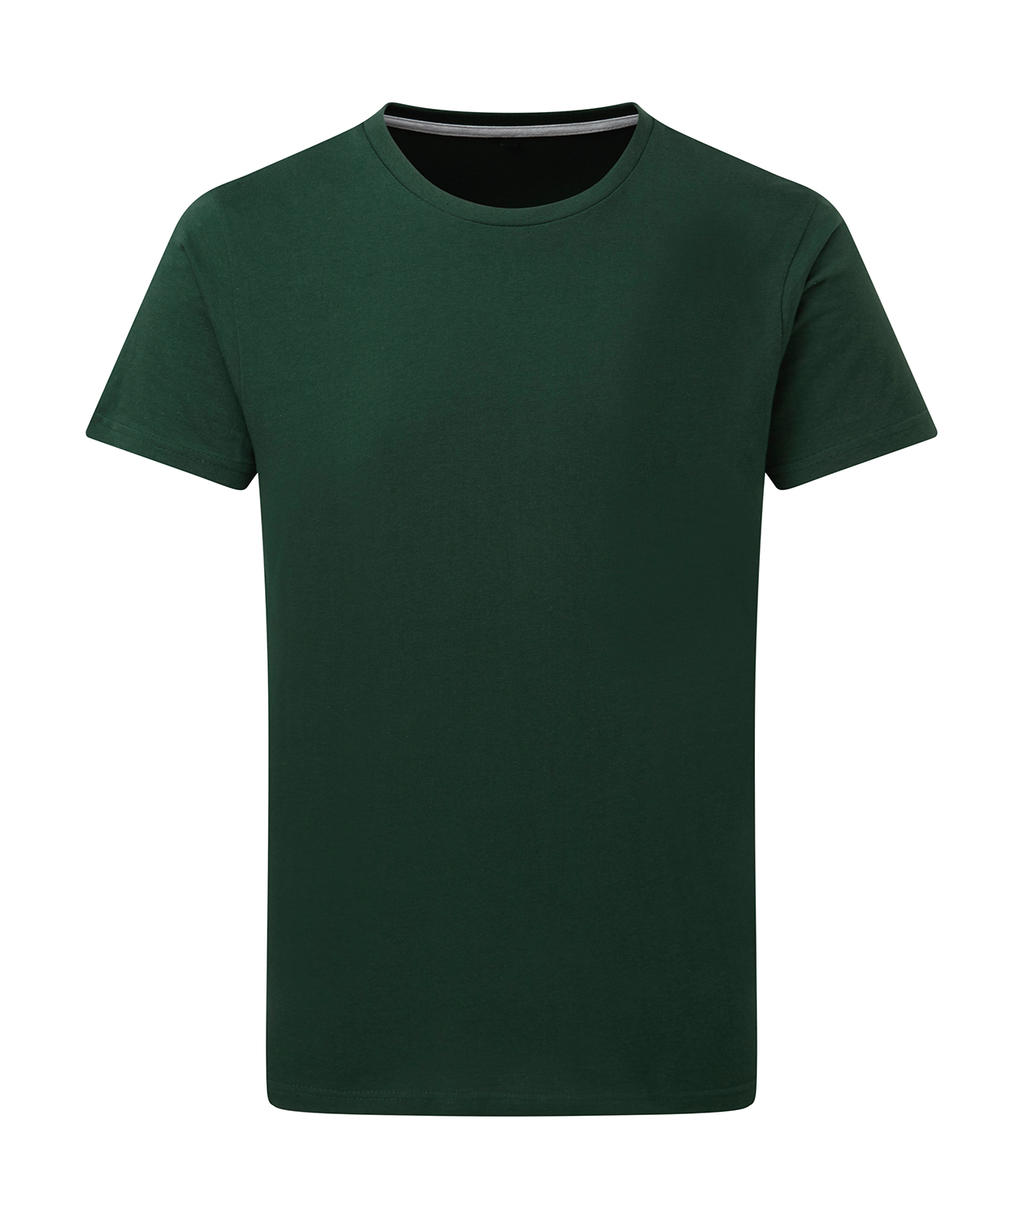  Perfect Print Tagless Tee in Farbe Bottle Green